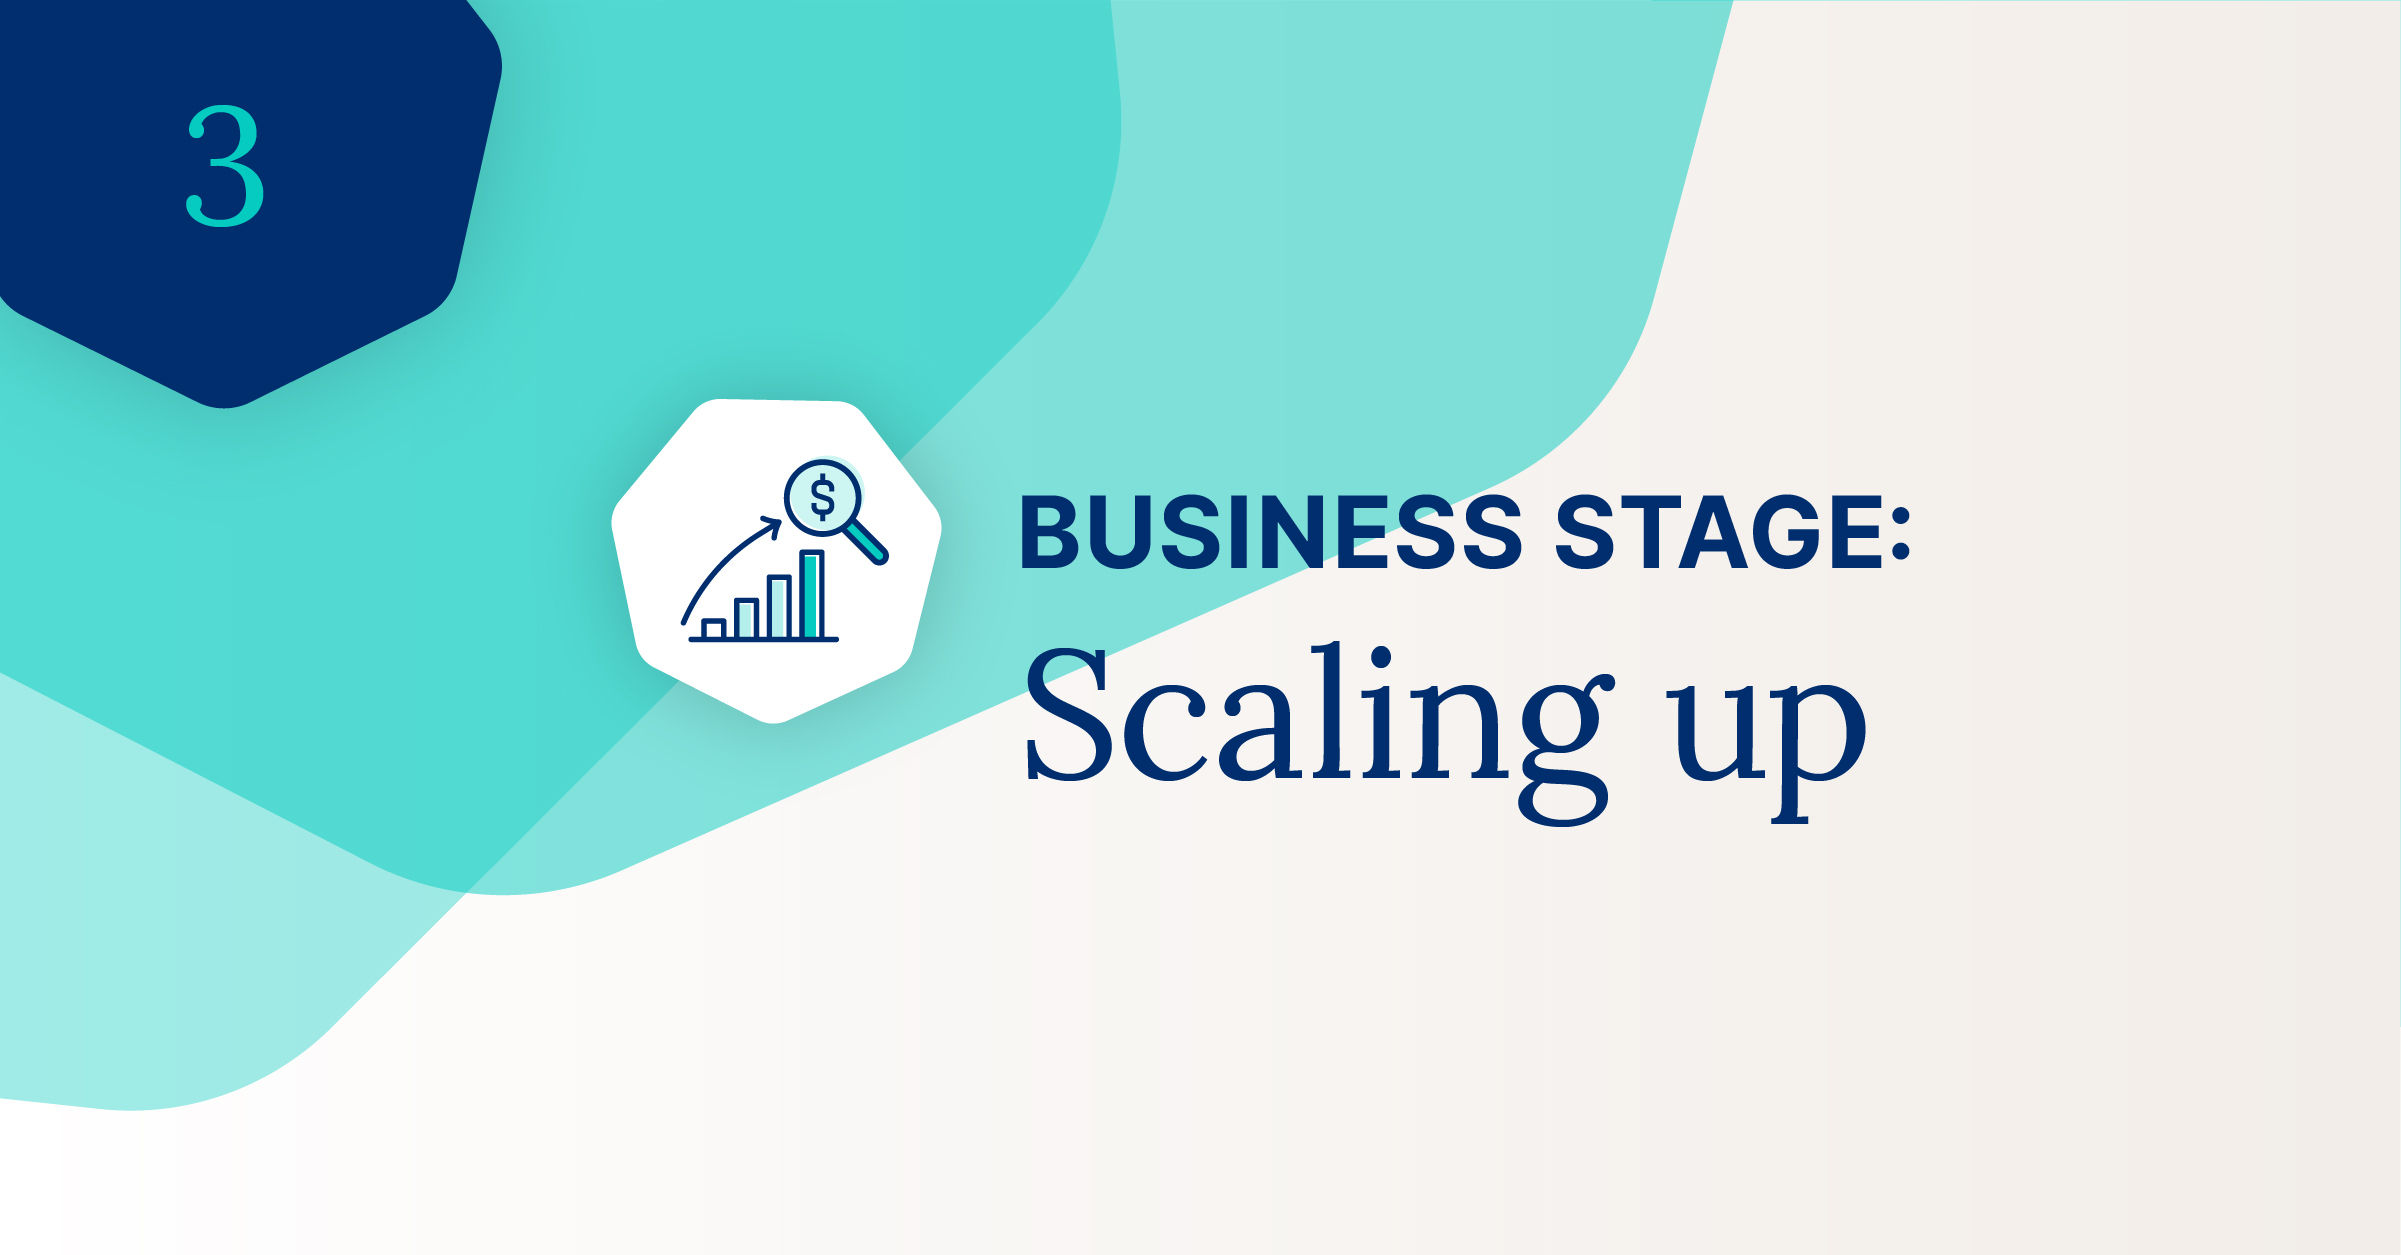 Scaling Up: Challenges and priorities of the 3rd business growth stage